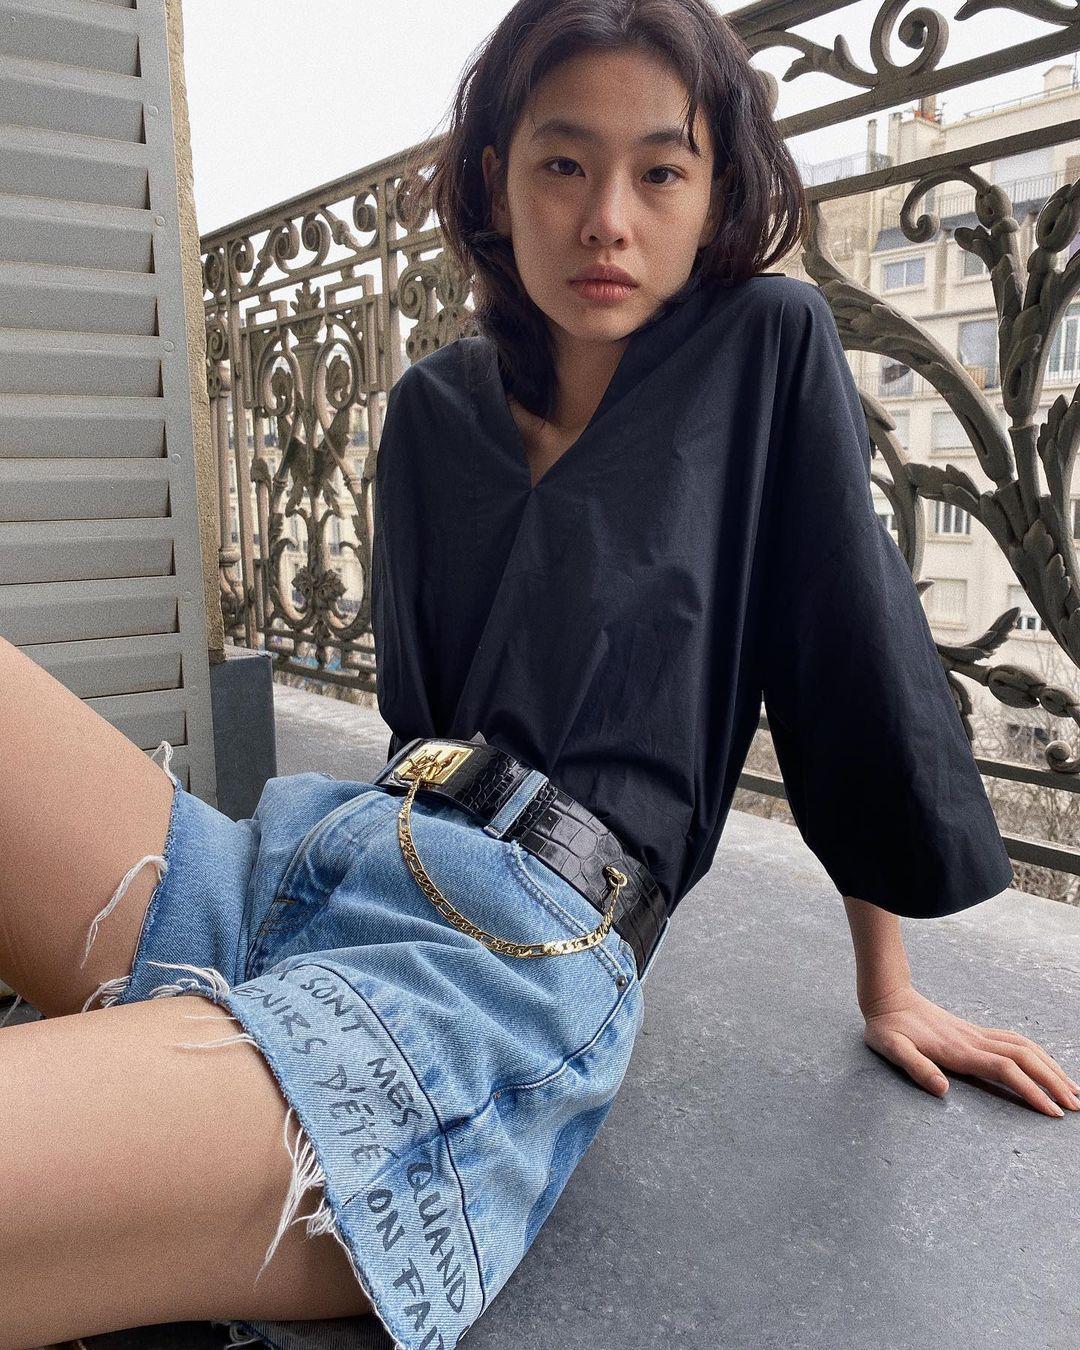 A lovely photo of HoYeon Jung in a blue blouse and denim short.